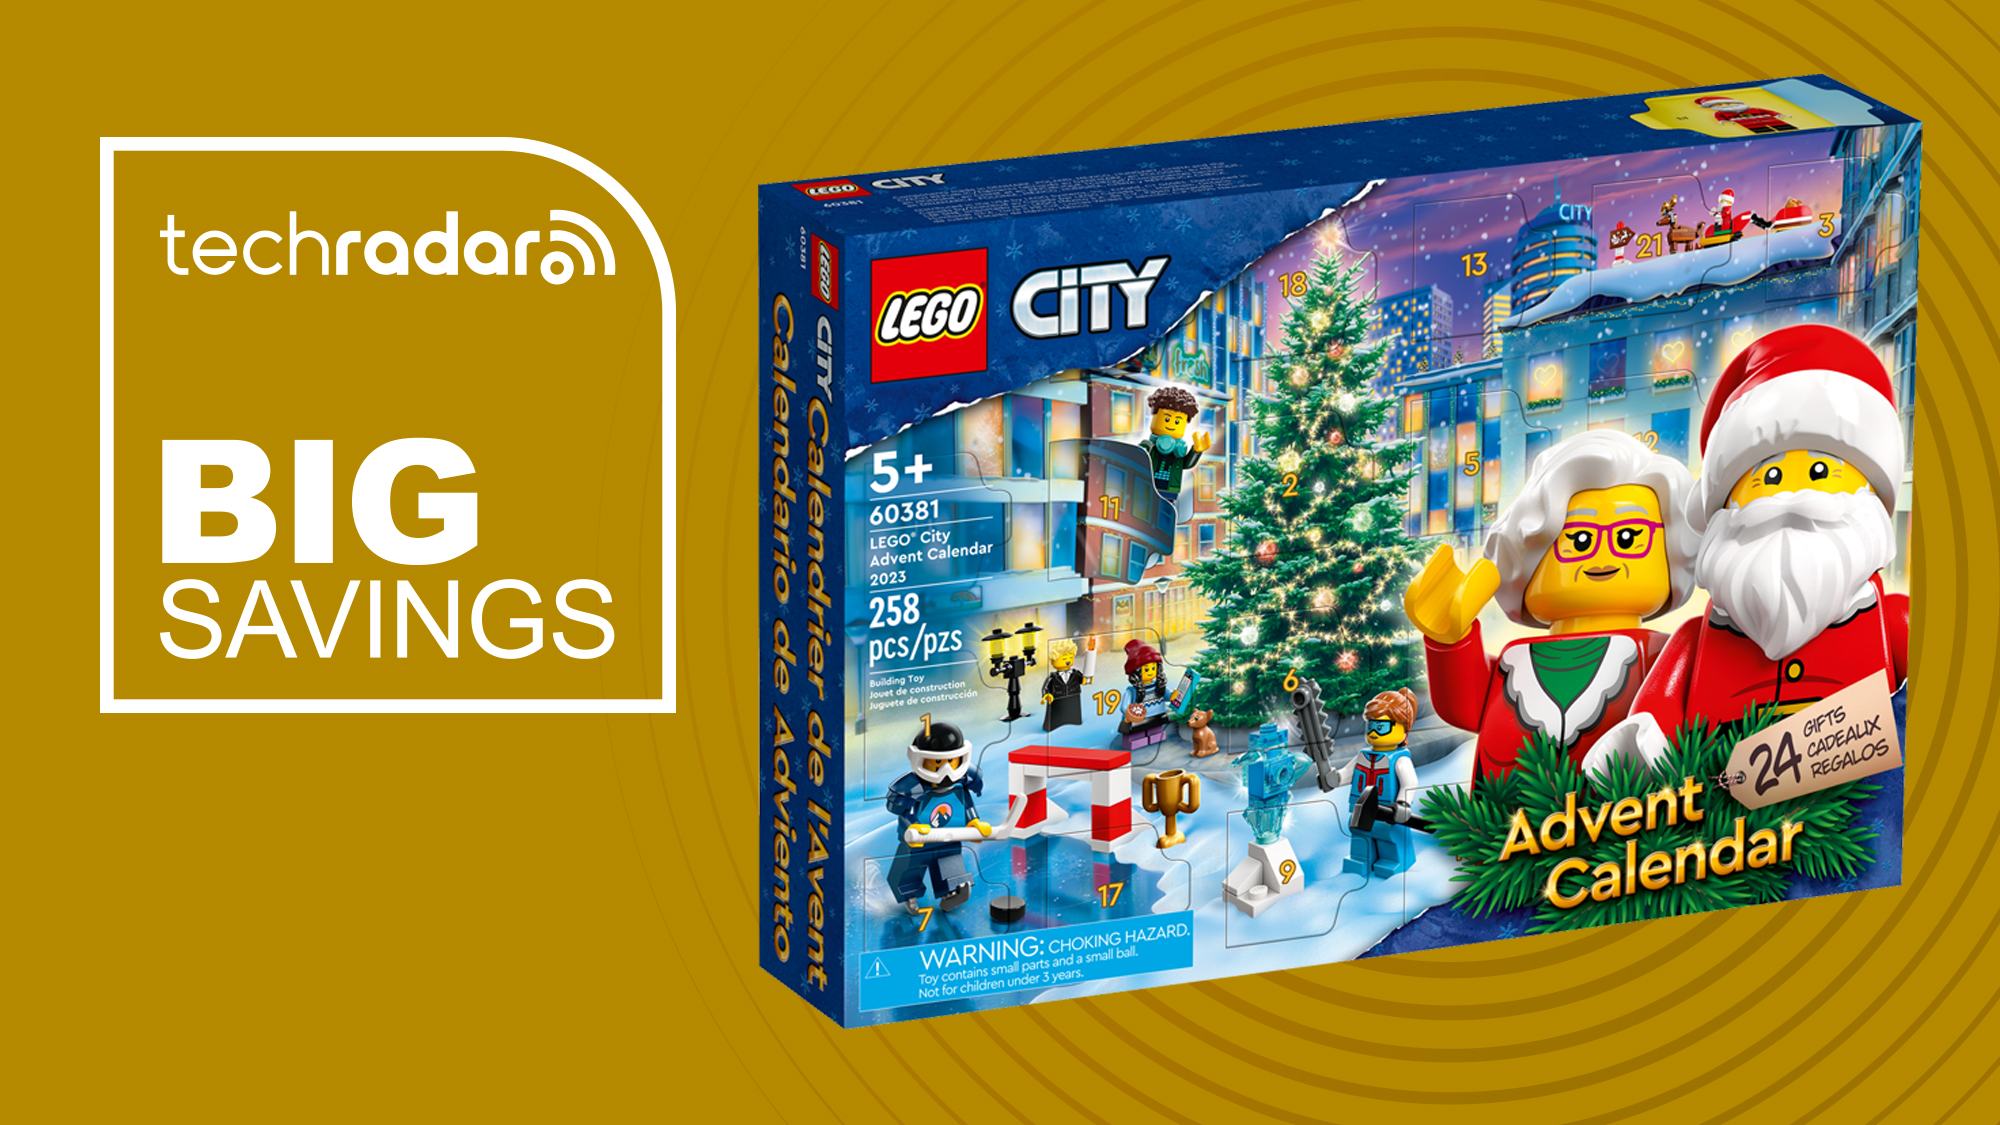 There are only a few days left on these Lego advent calendars grab